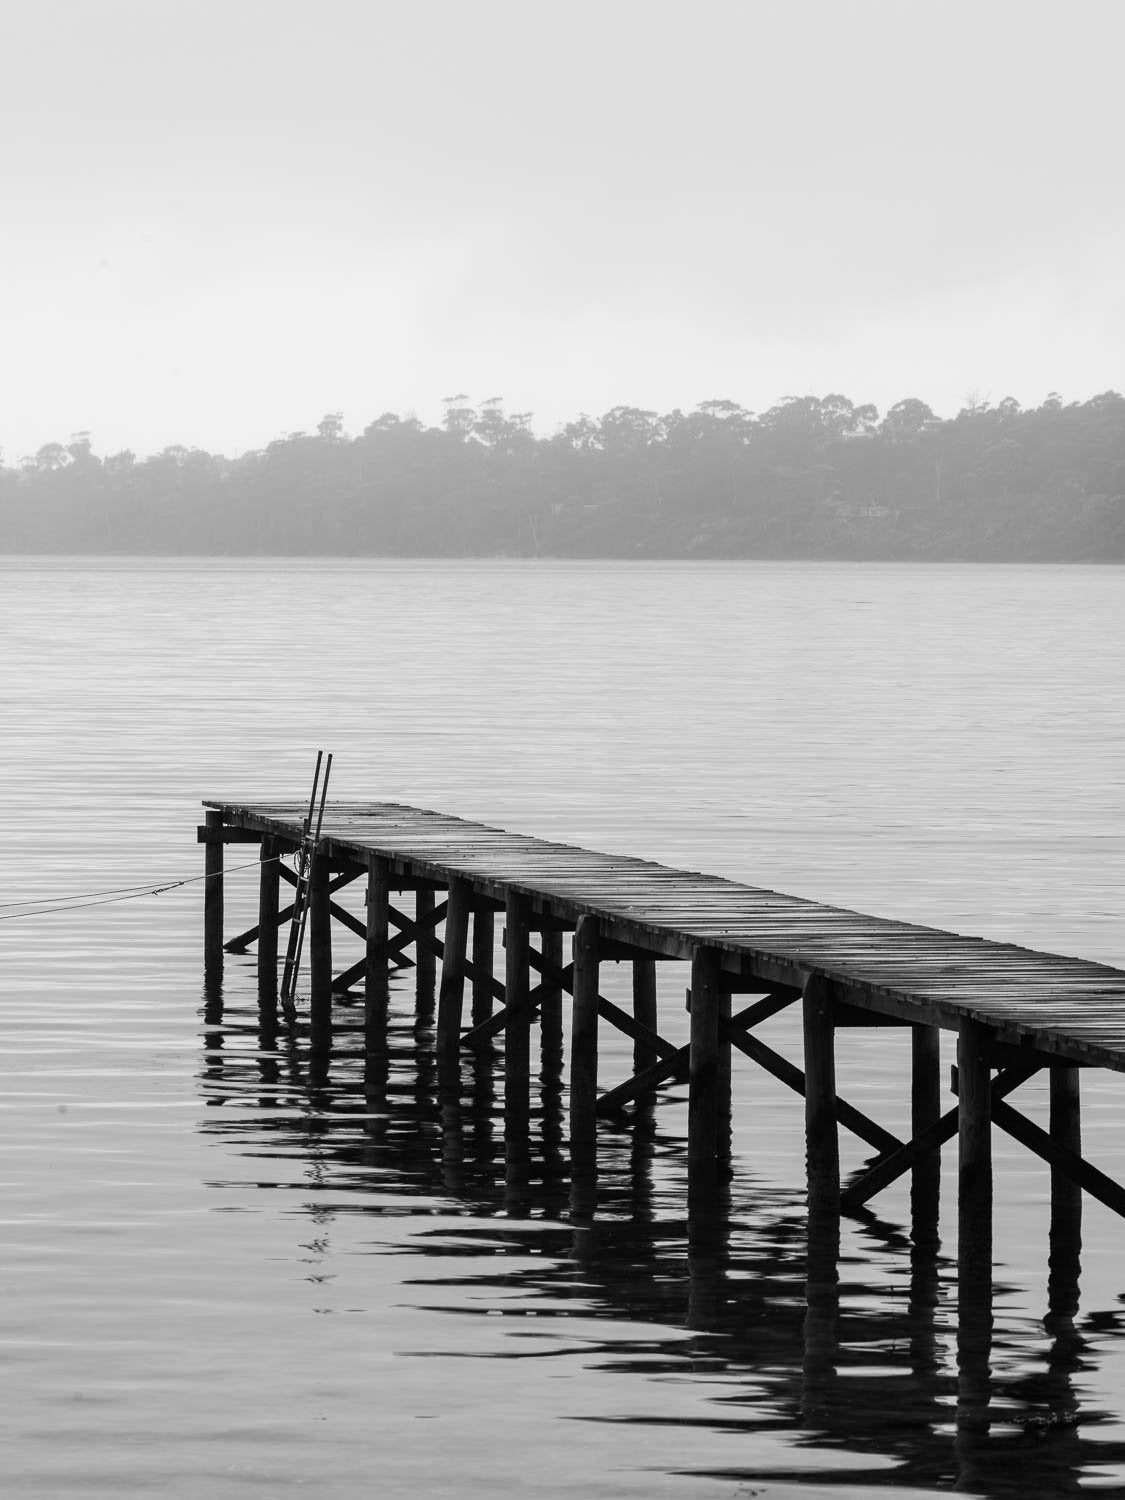 Wooden bridge over water, Lone Jetty, Bay of Fires